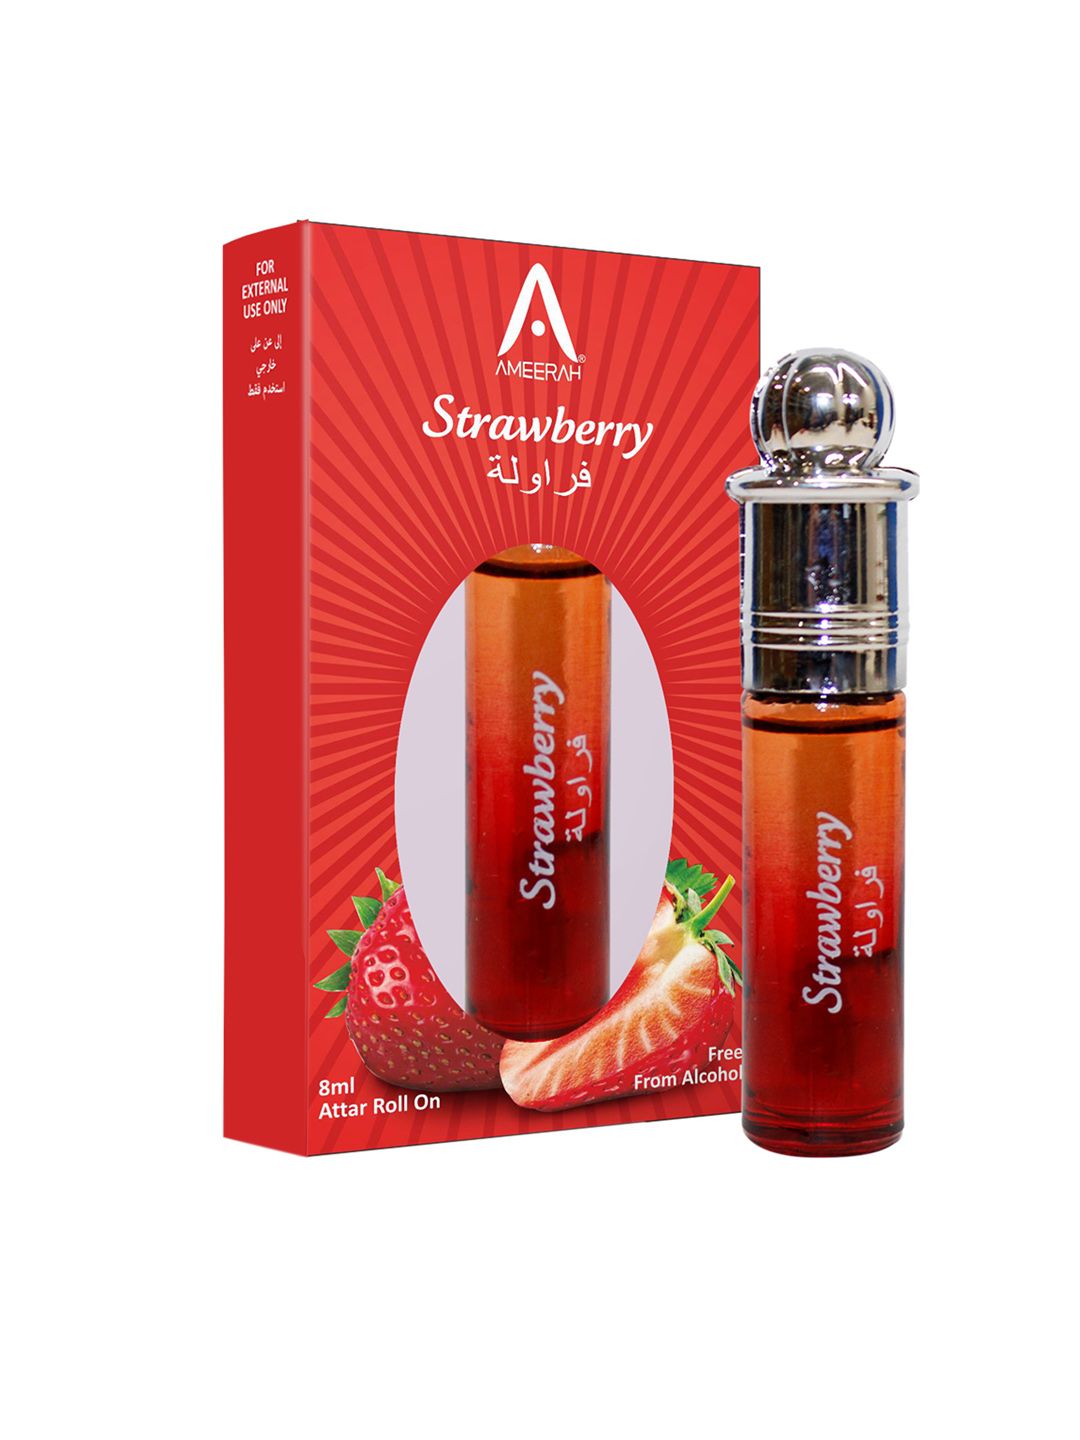 St. John Ameerah Strawberry Attar Roll On - 8 ml Price in India